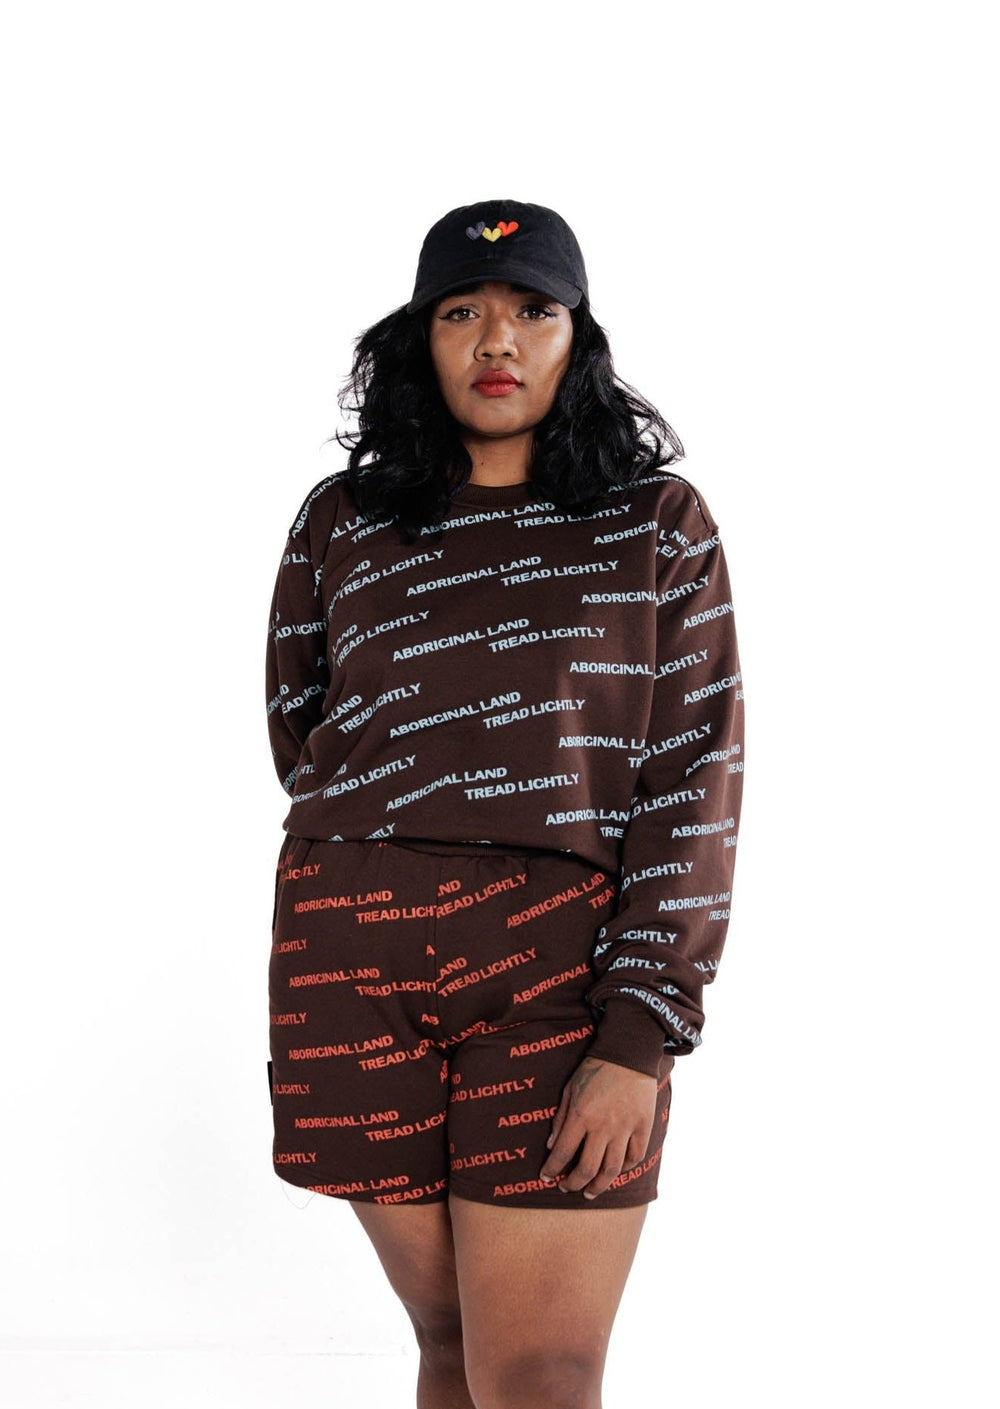 Clothing The Gaps. Blue Tread Lightly Crew. Brown Crewneck jumper with repeating pattern all over crew of the words 'Aboriginal Land Tread Lightly' text in a light blue colour. Solid brown cuffs, waist band and neckline.